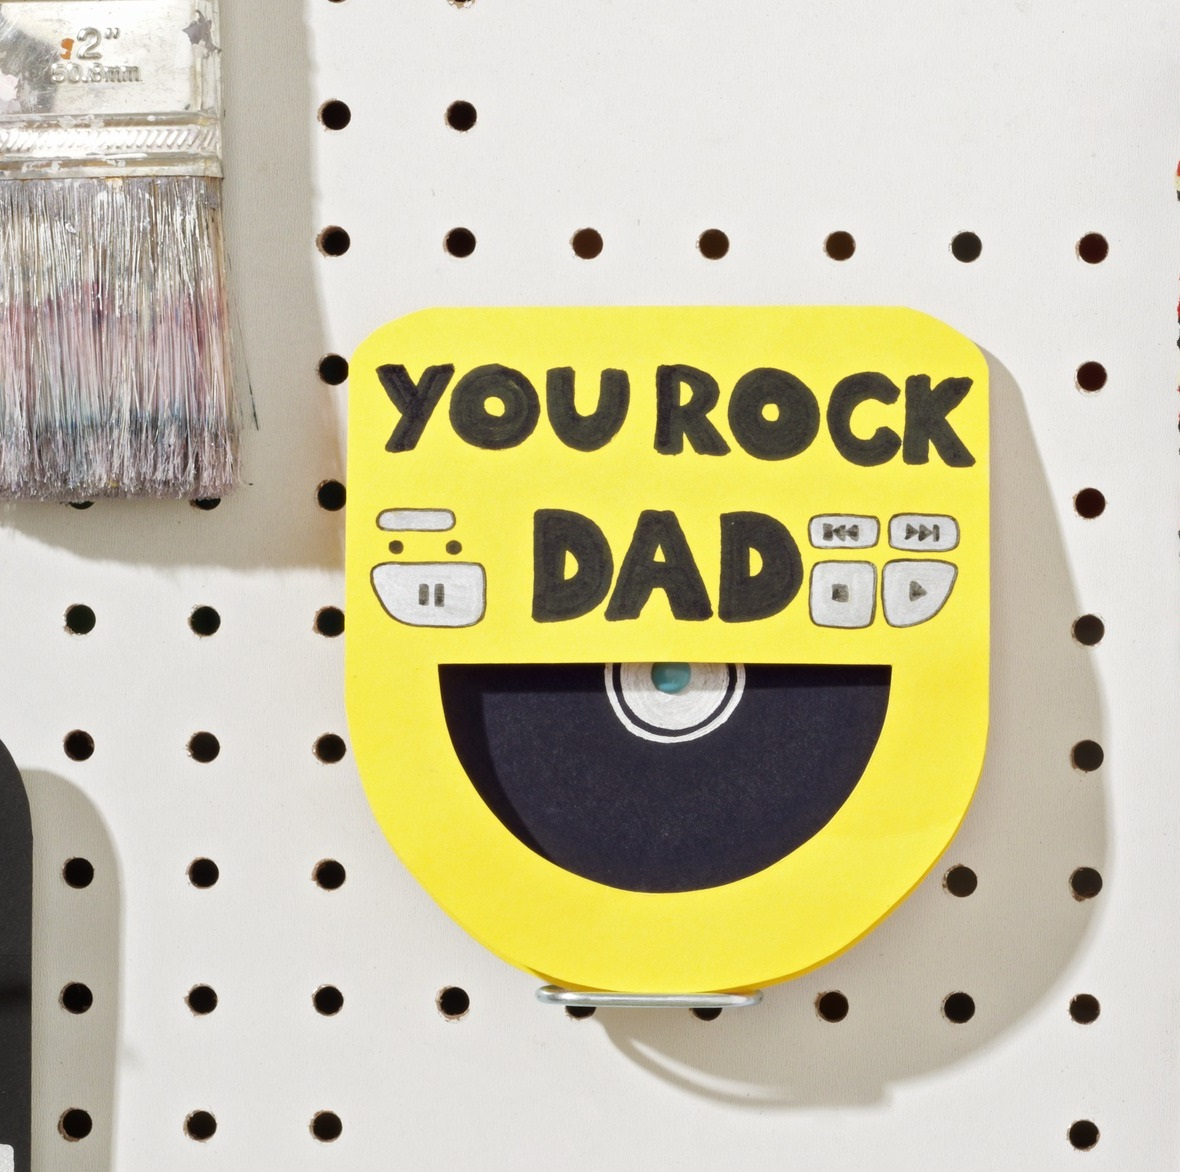 Funny Homemade Birthday Card Ideas Funny Dad Birthday Cards From Daughter Homemade Father S Day